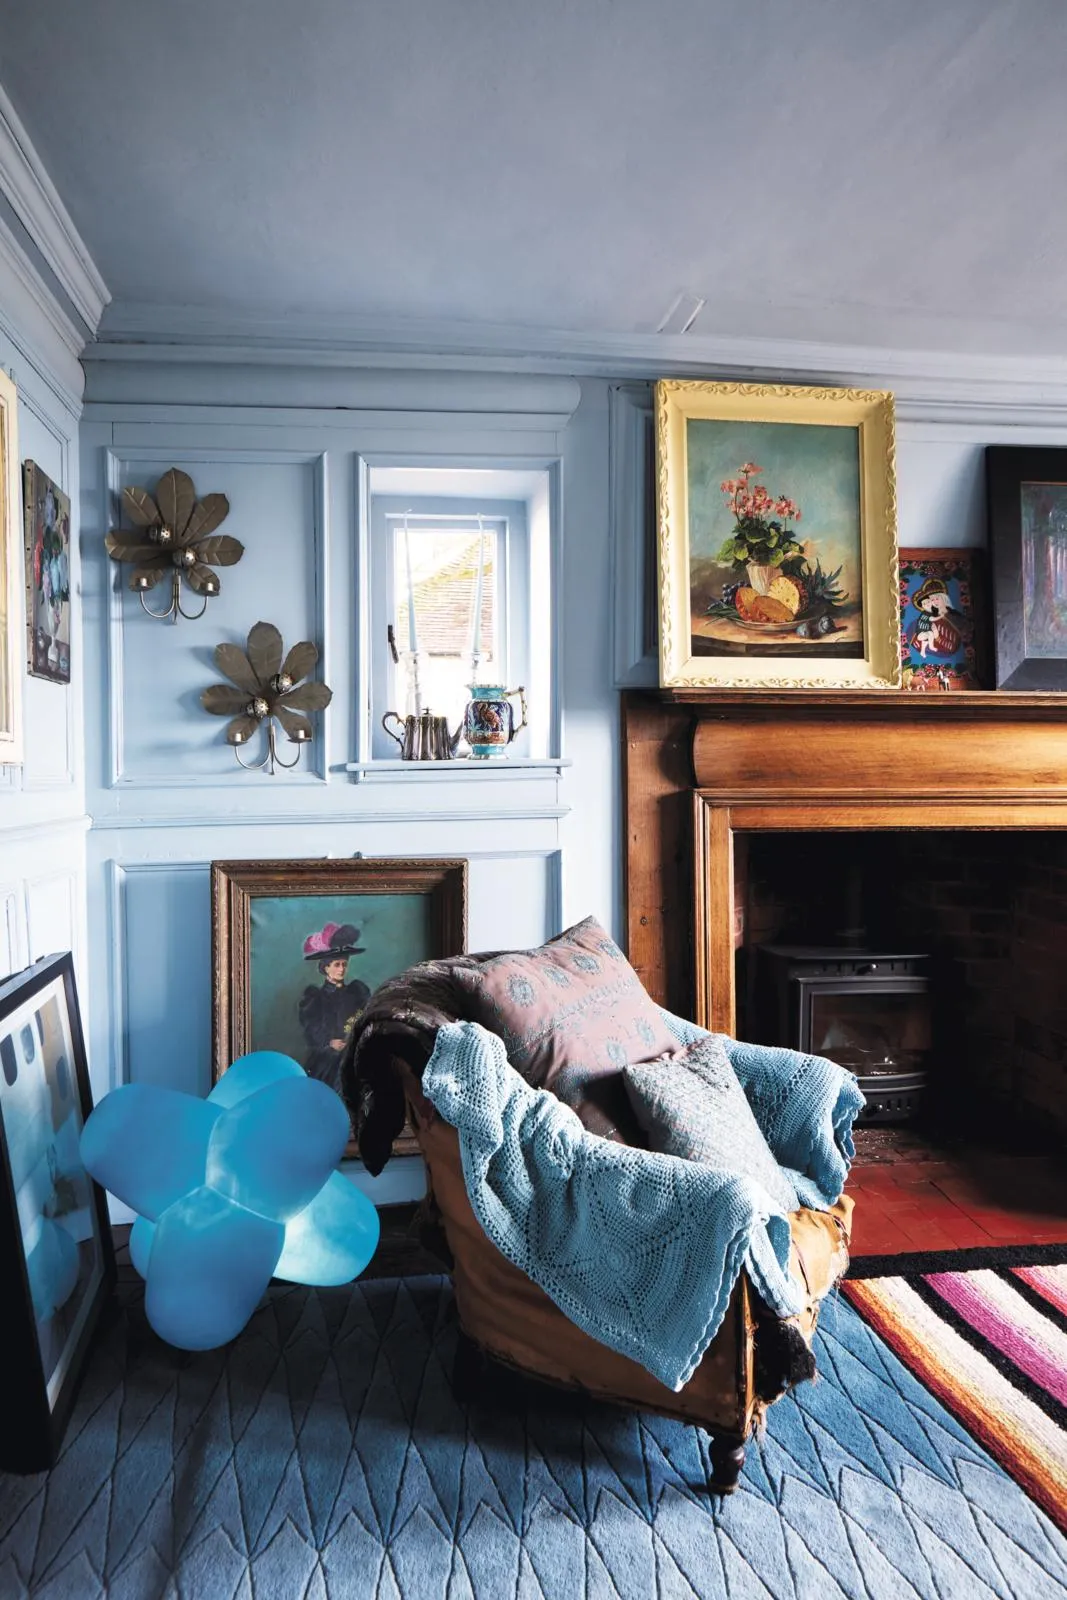 Nikki Tibbles' country home blue room